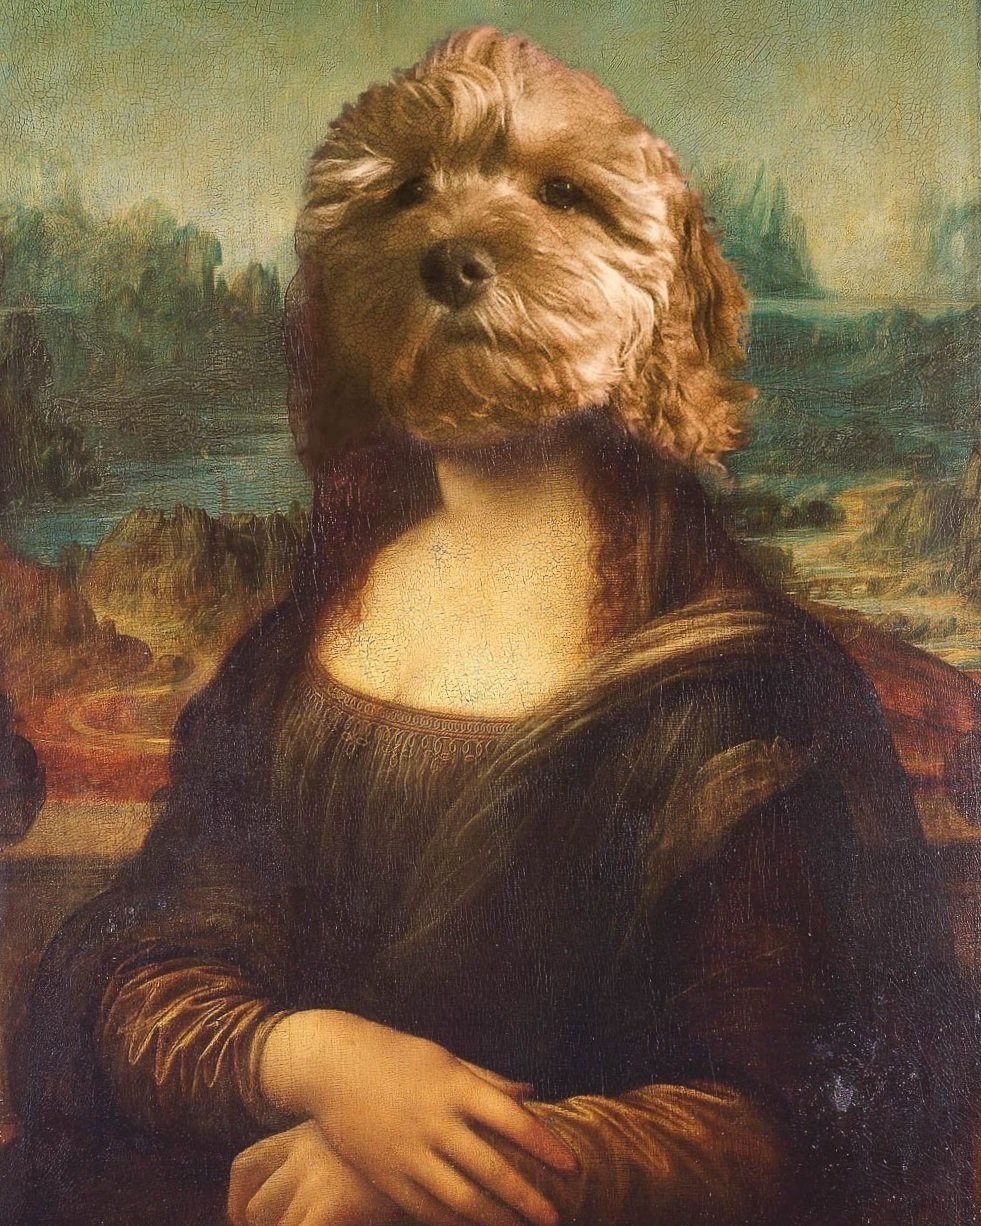 The Mona Lisa painting with the head of a cavoodle